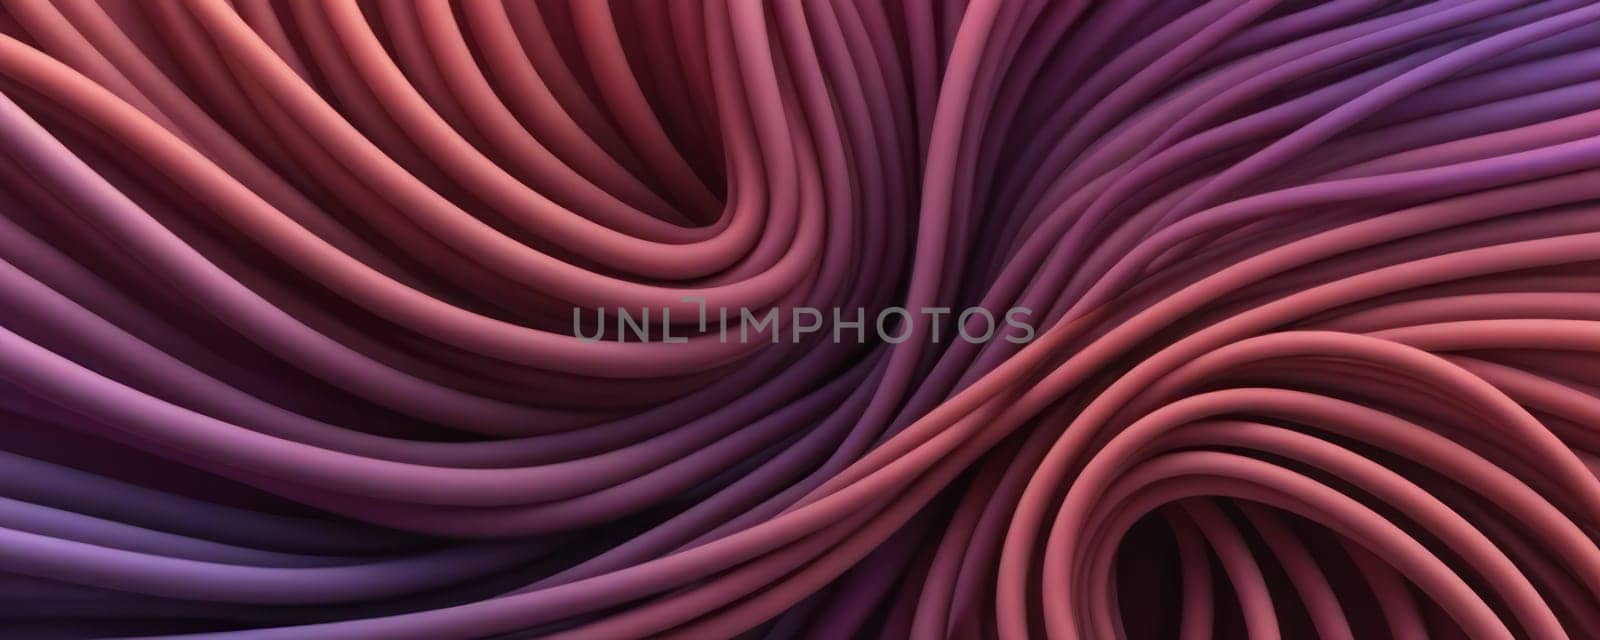 Coiled Shapes in Maroon and Medium purple by nkotlyar